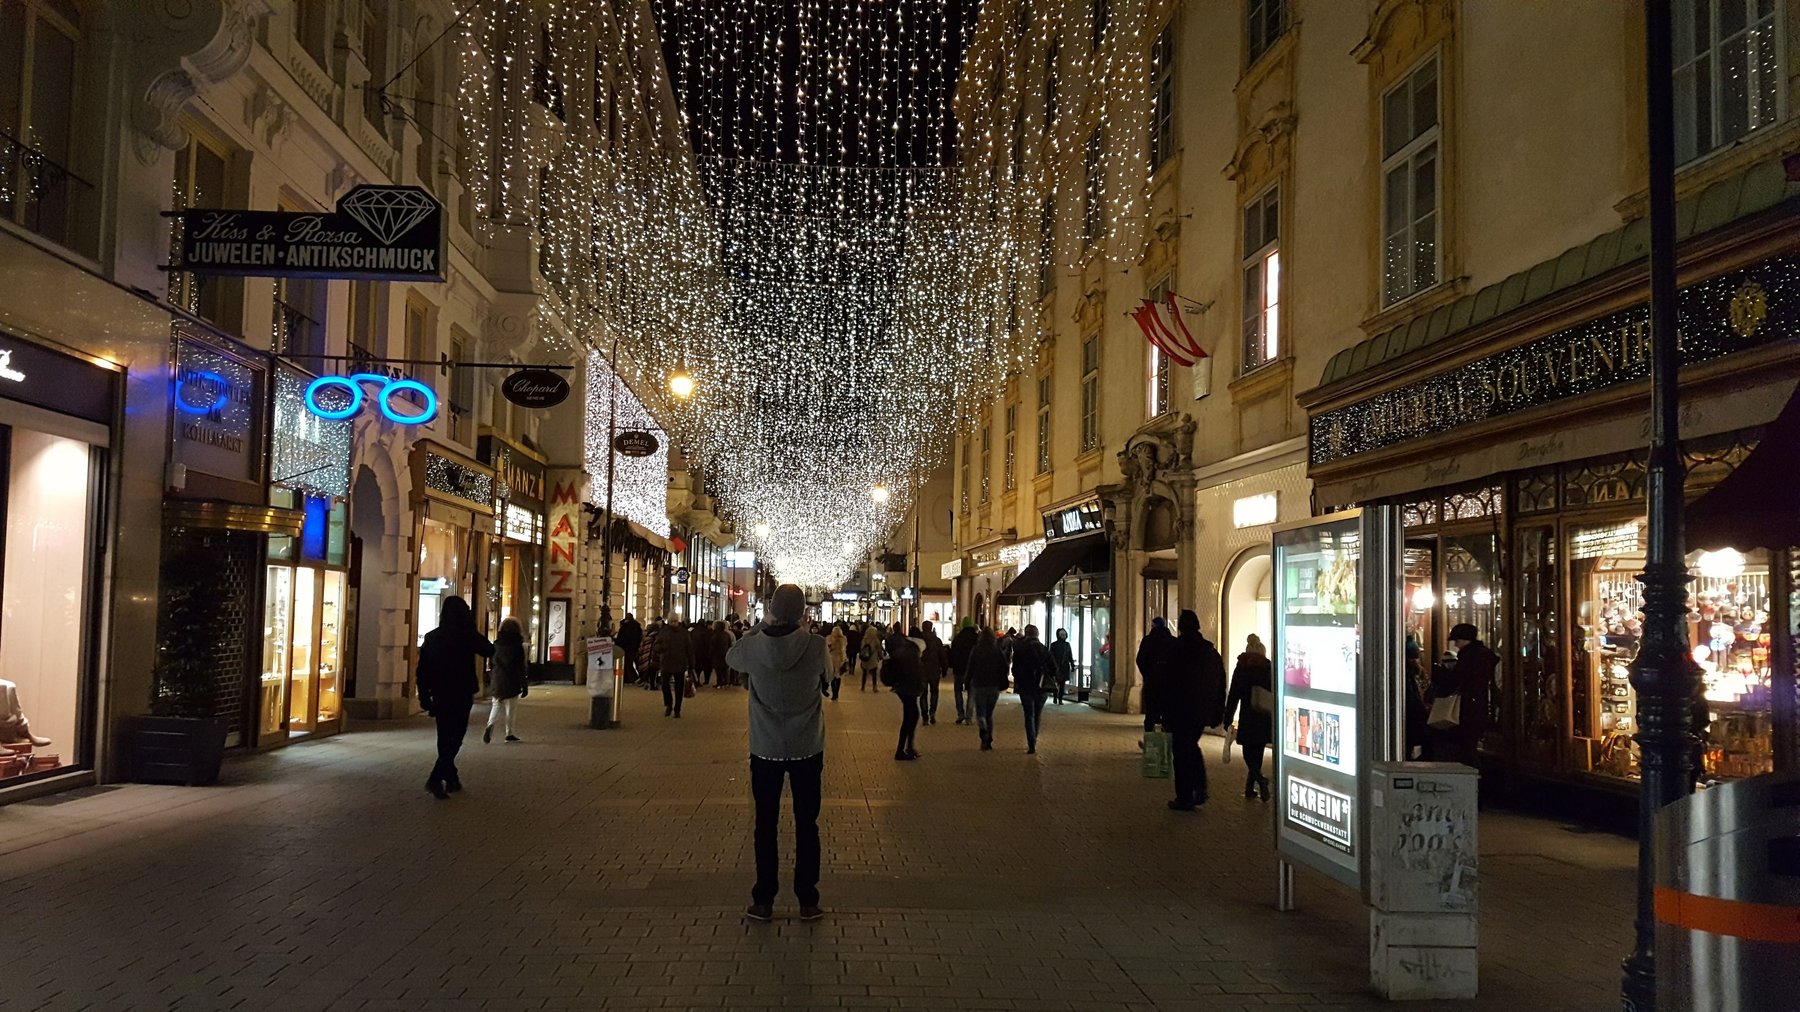 A street lined with shops and decorated with lights.